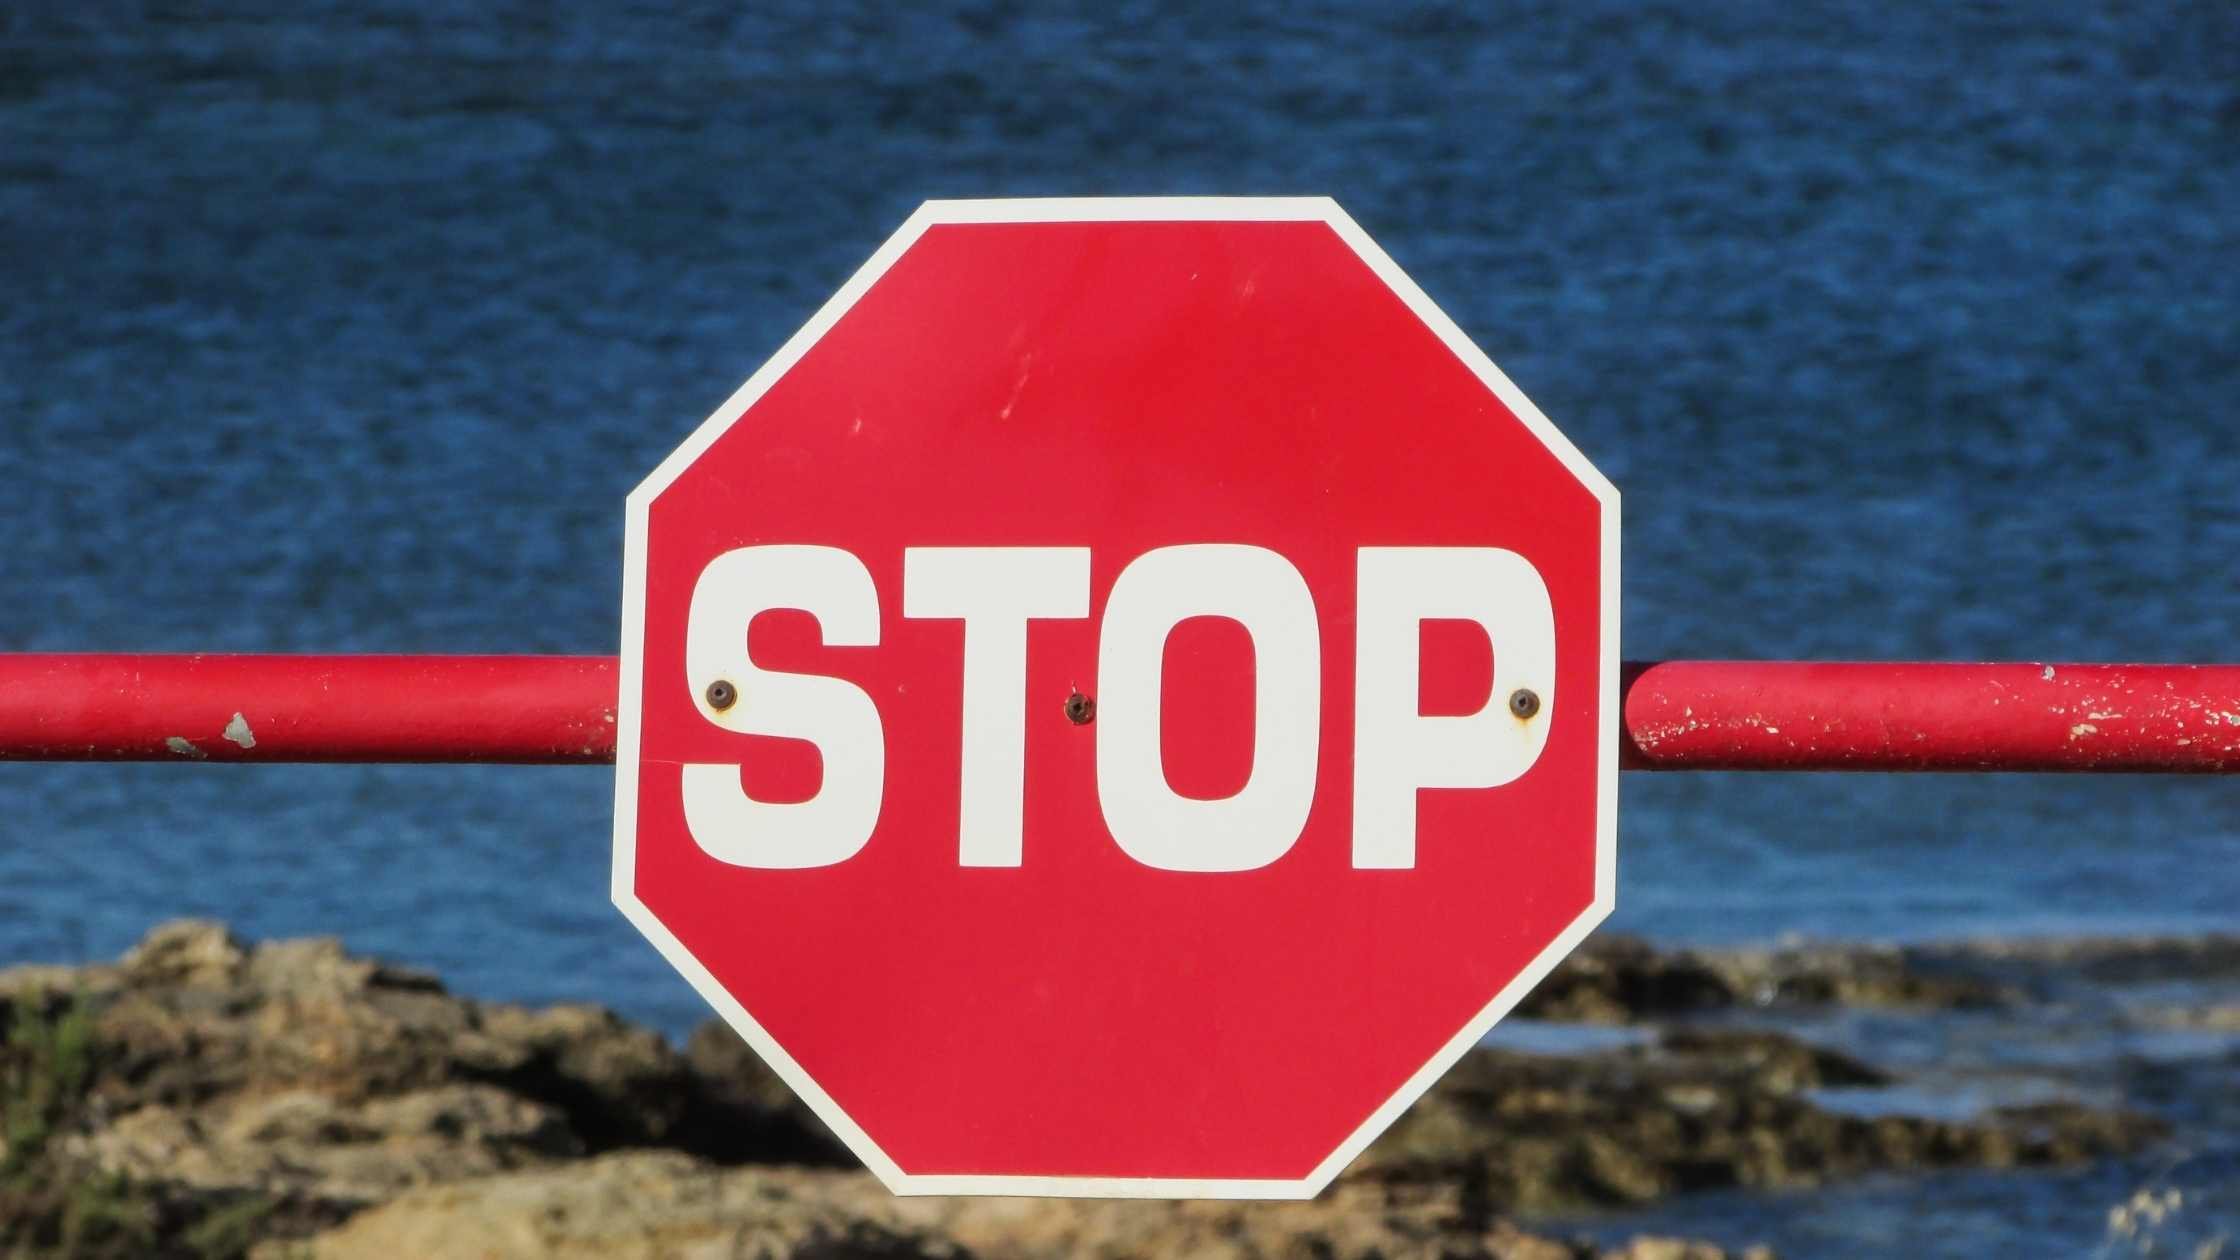 Red stop sign attached to a barrier, sea and sky in the background